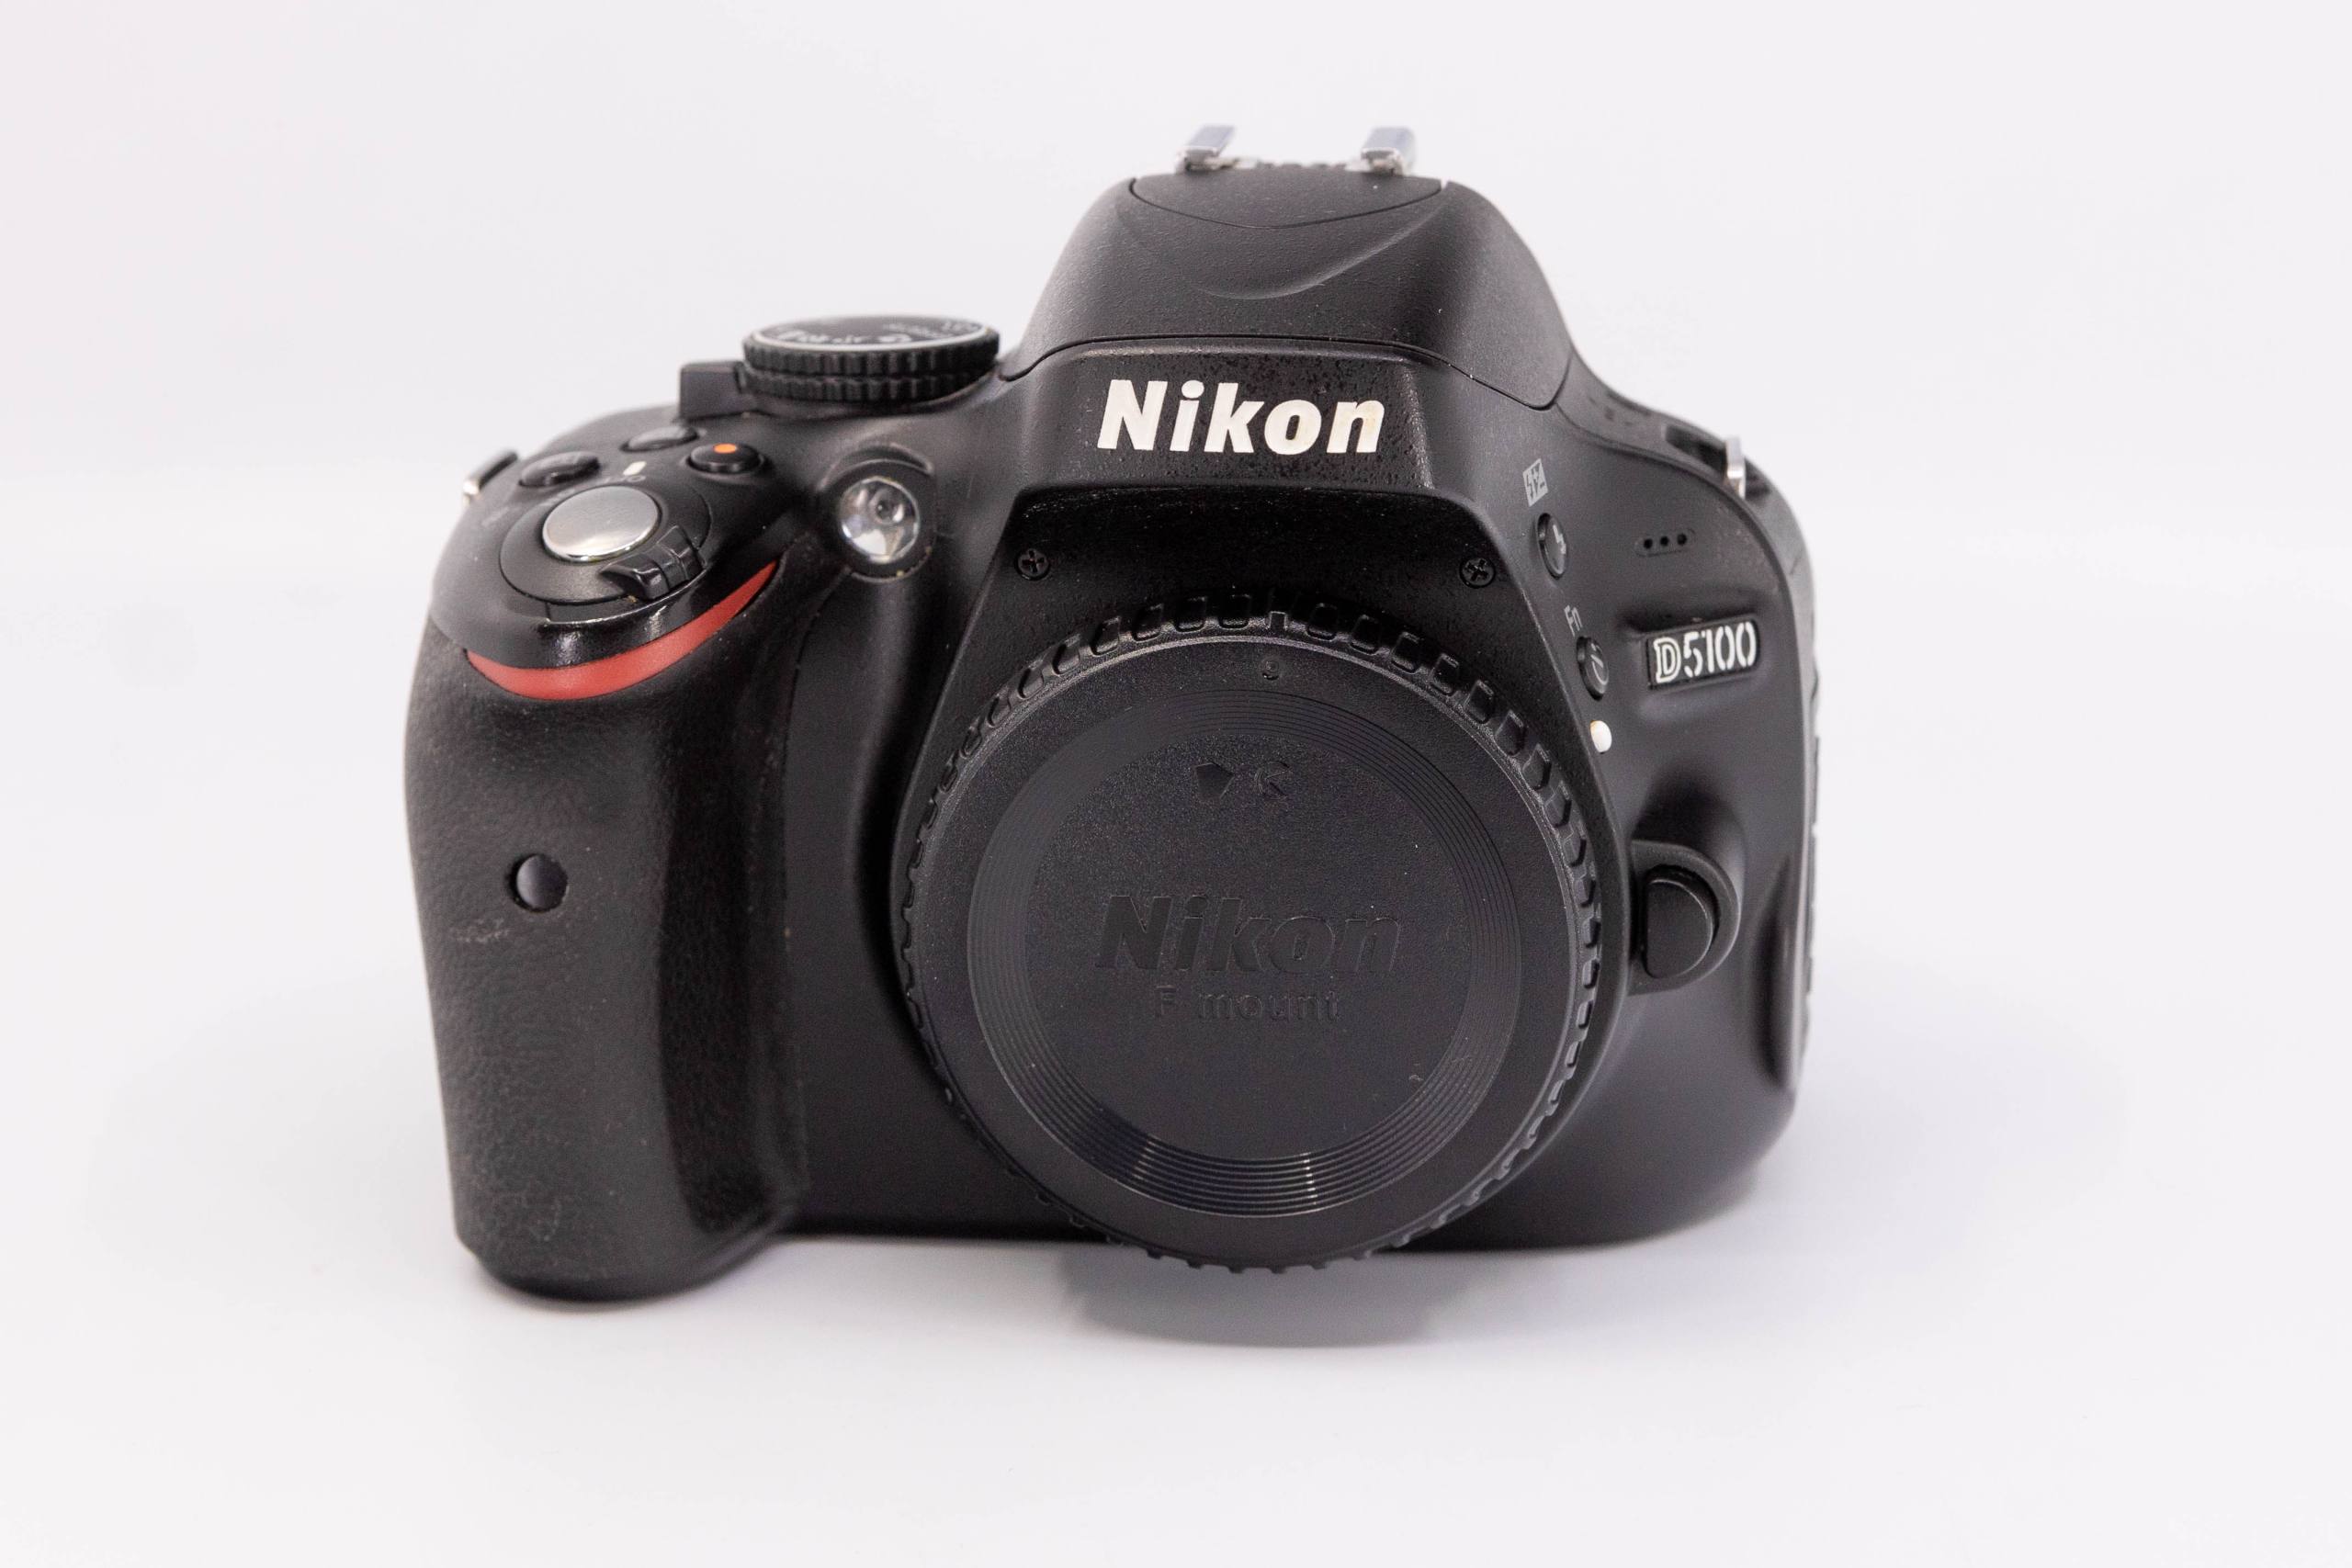 Infrared 720nm Converted Nikon D5100 DSLR Camera (Used